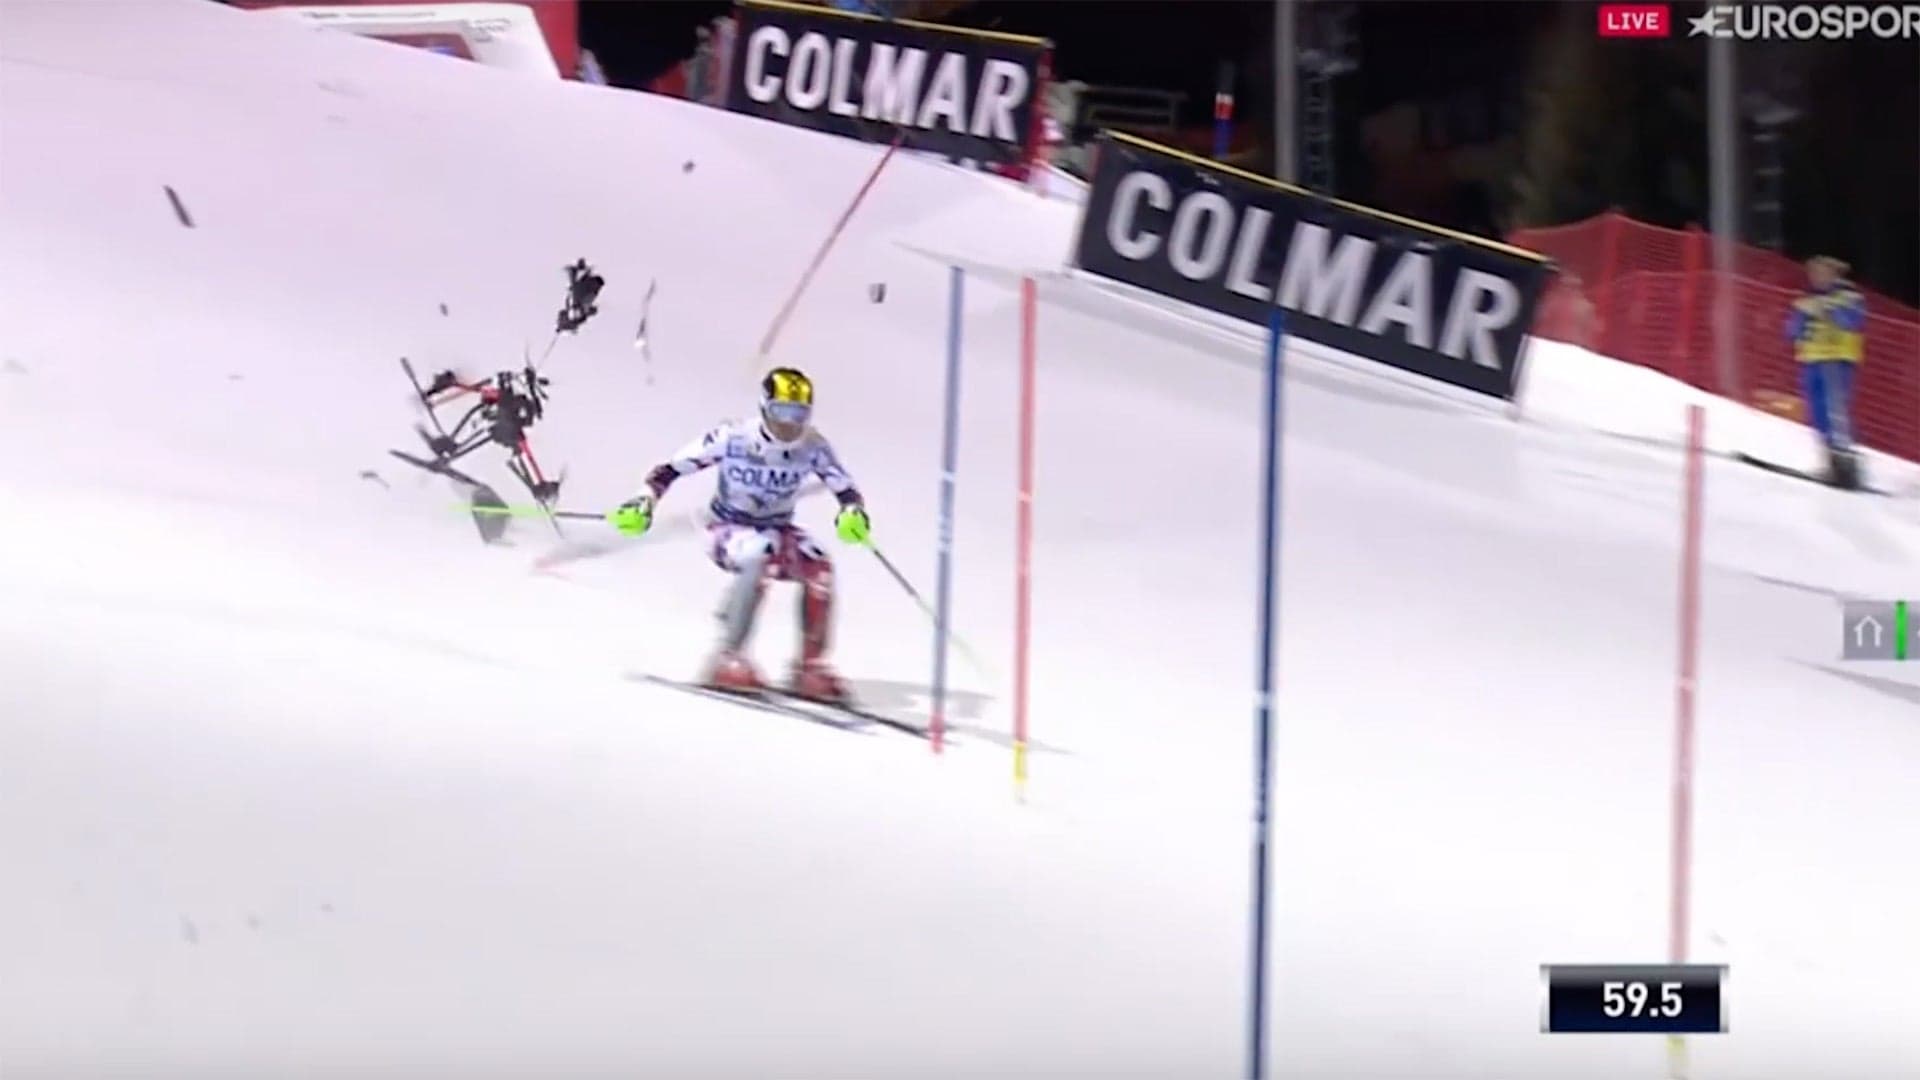 Watch This Giant Drone Crash Right Behind an Unsuspecting Skier